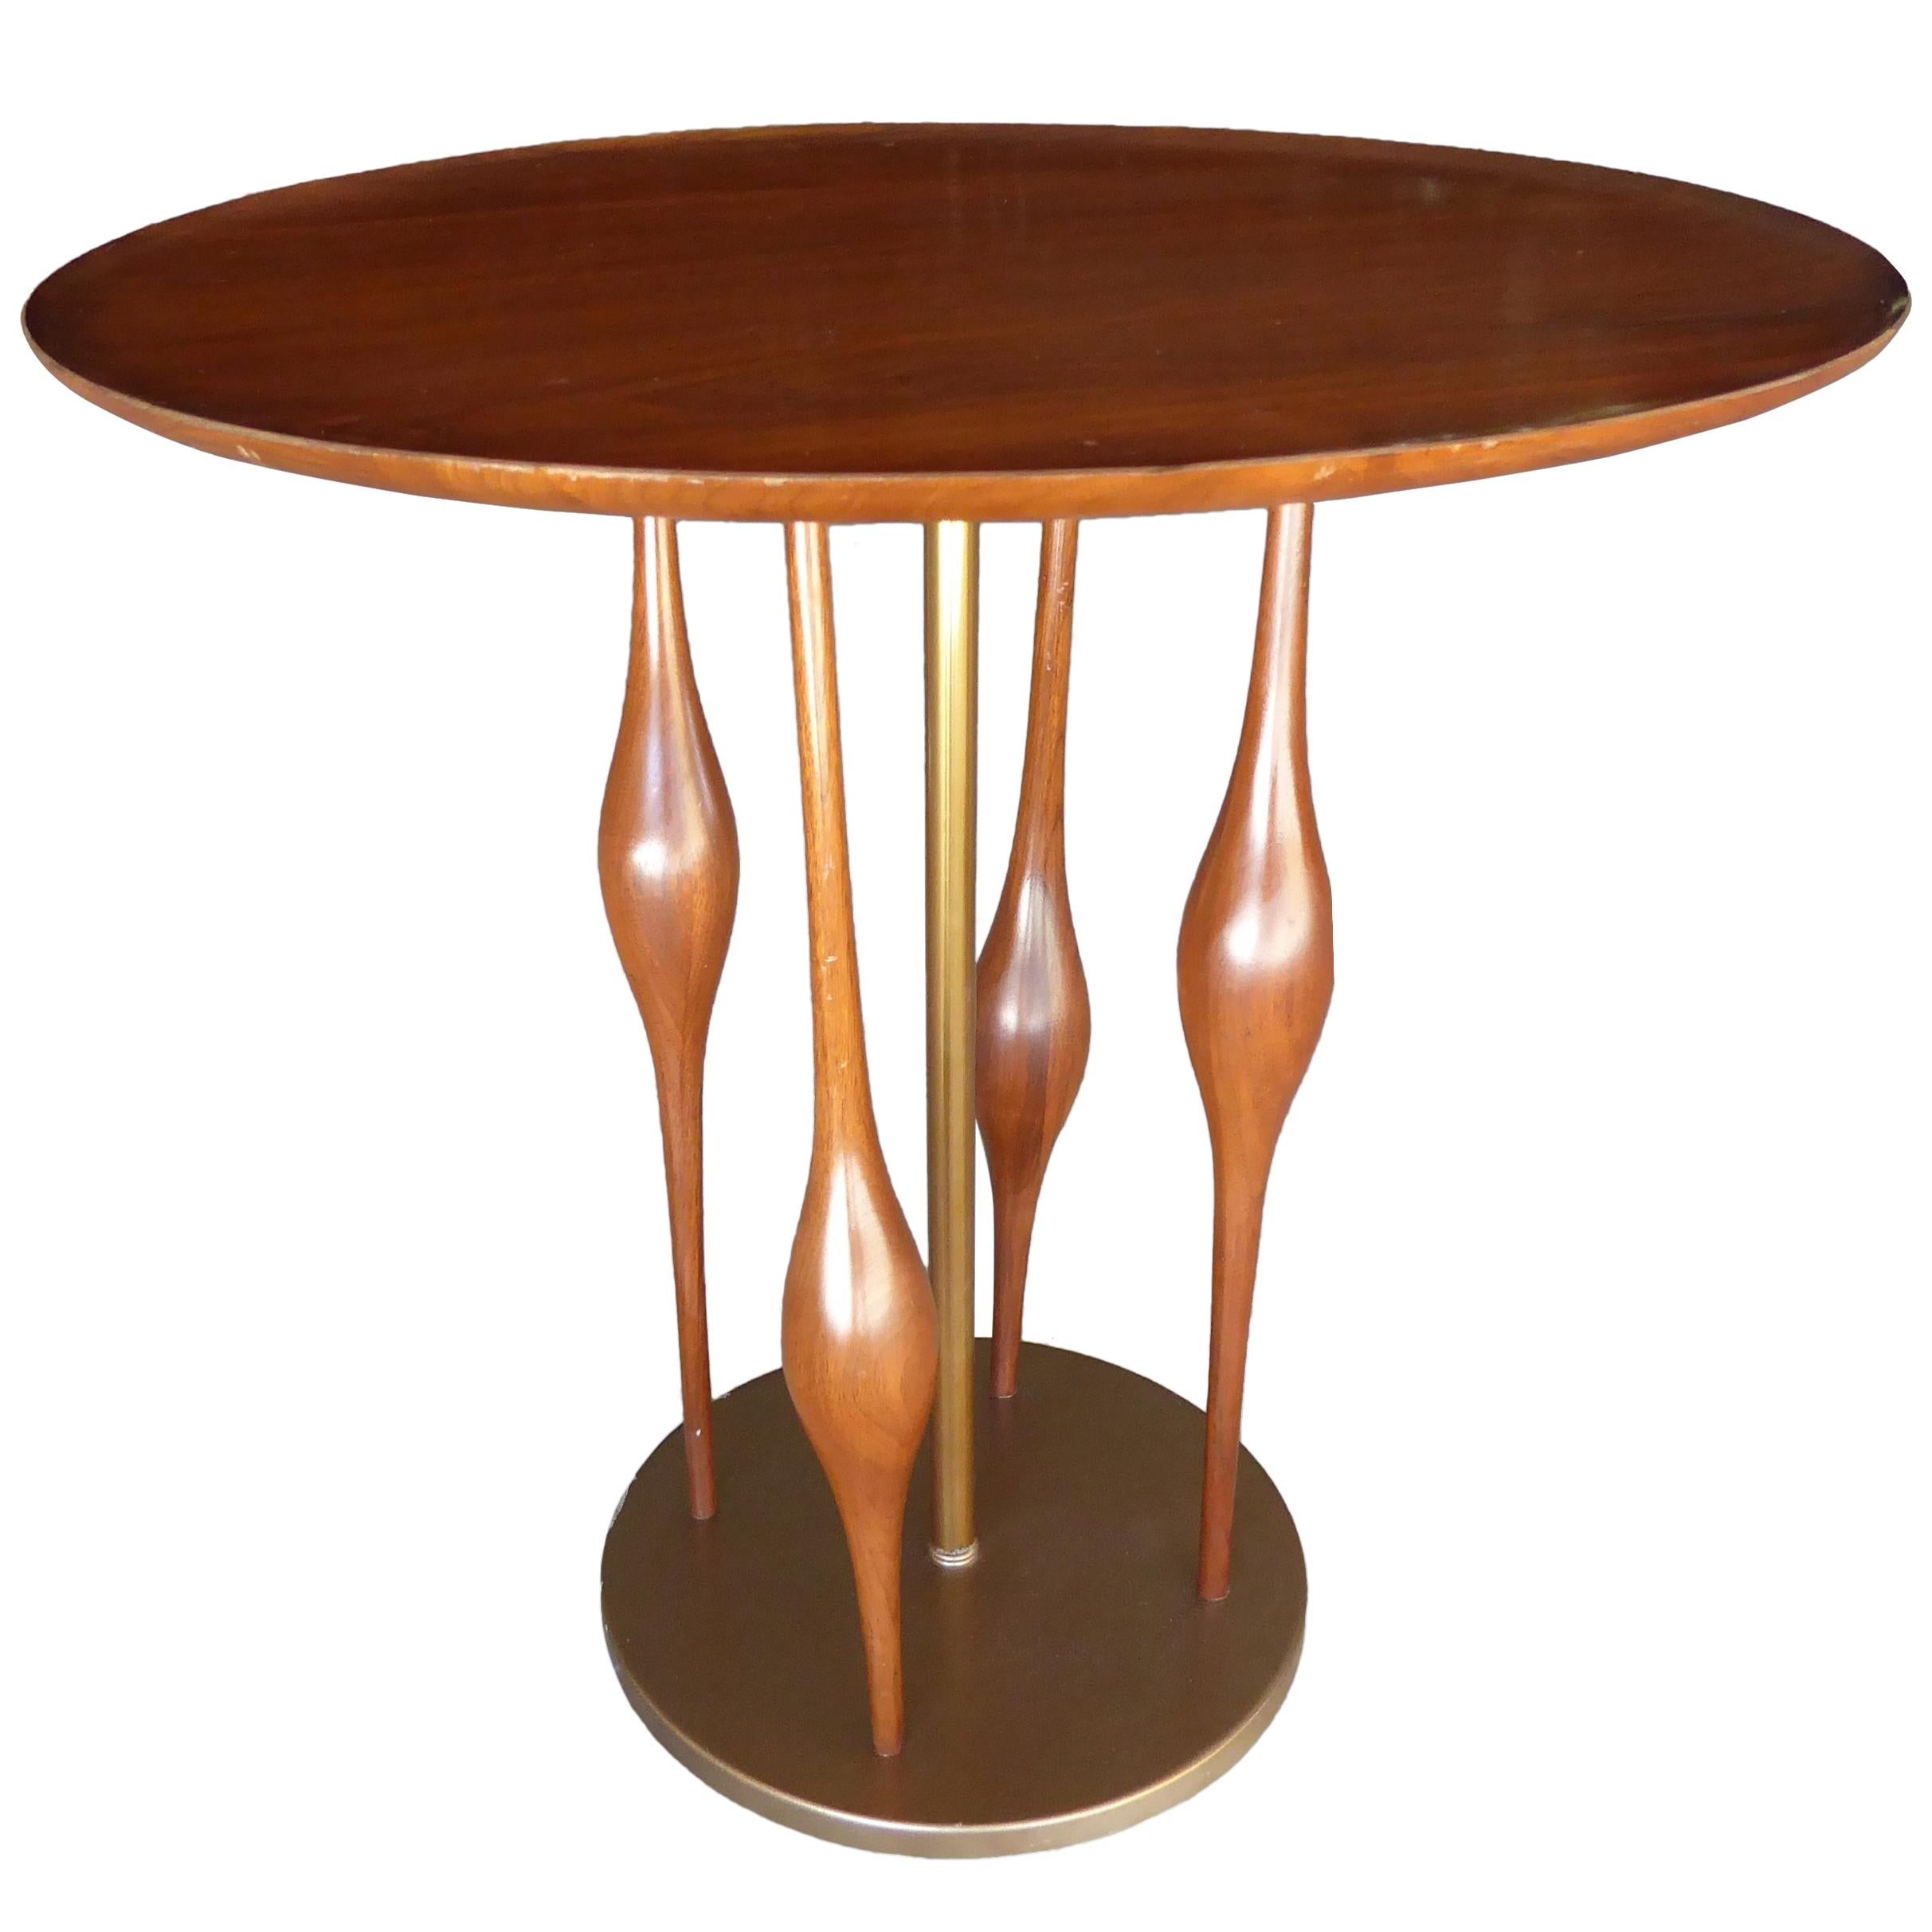 Walnut and Brass Side Table Attributed to Modeline of California